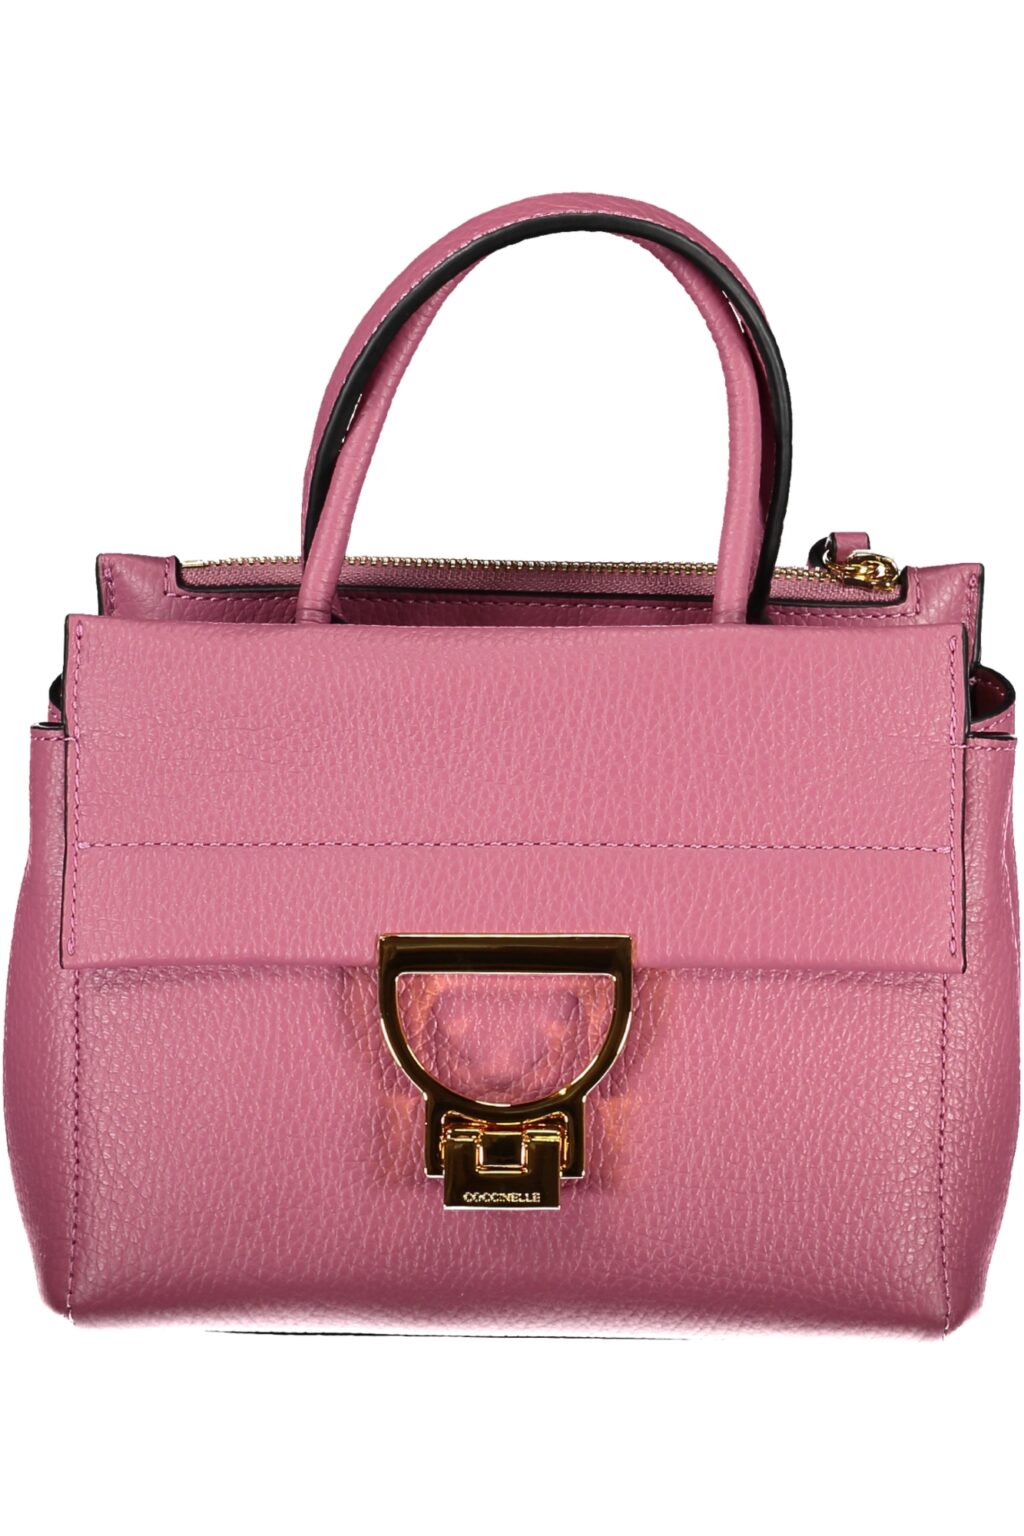 COCCINELLE PINK WOMEN'S BAG E1MD5180201_RSV48